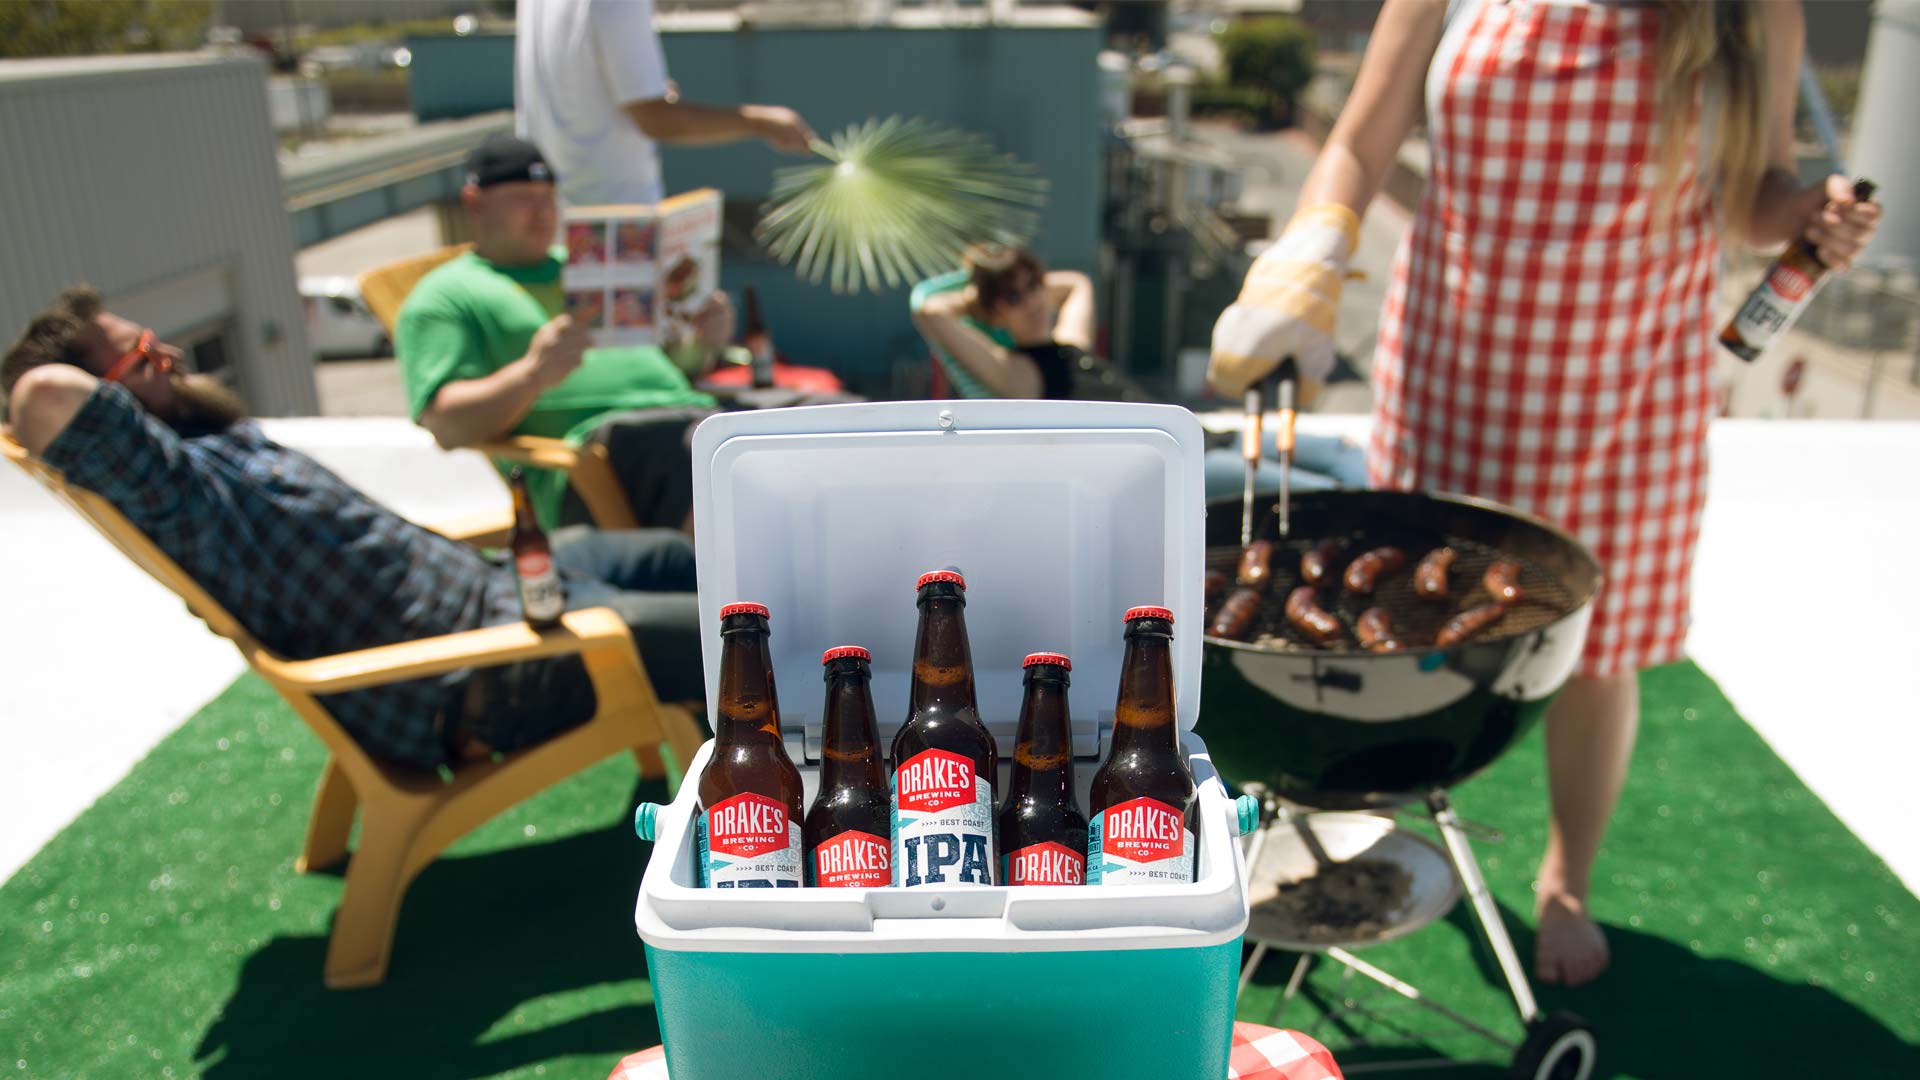 A cooler filled with Drake's IPA and staff in enjoying a cook out